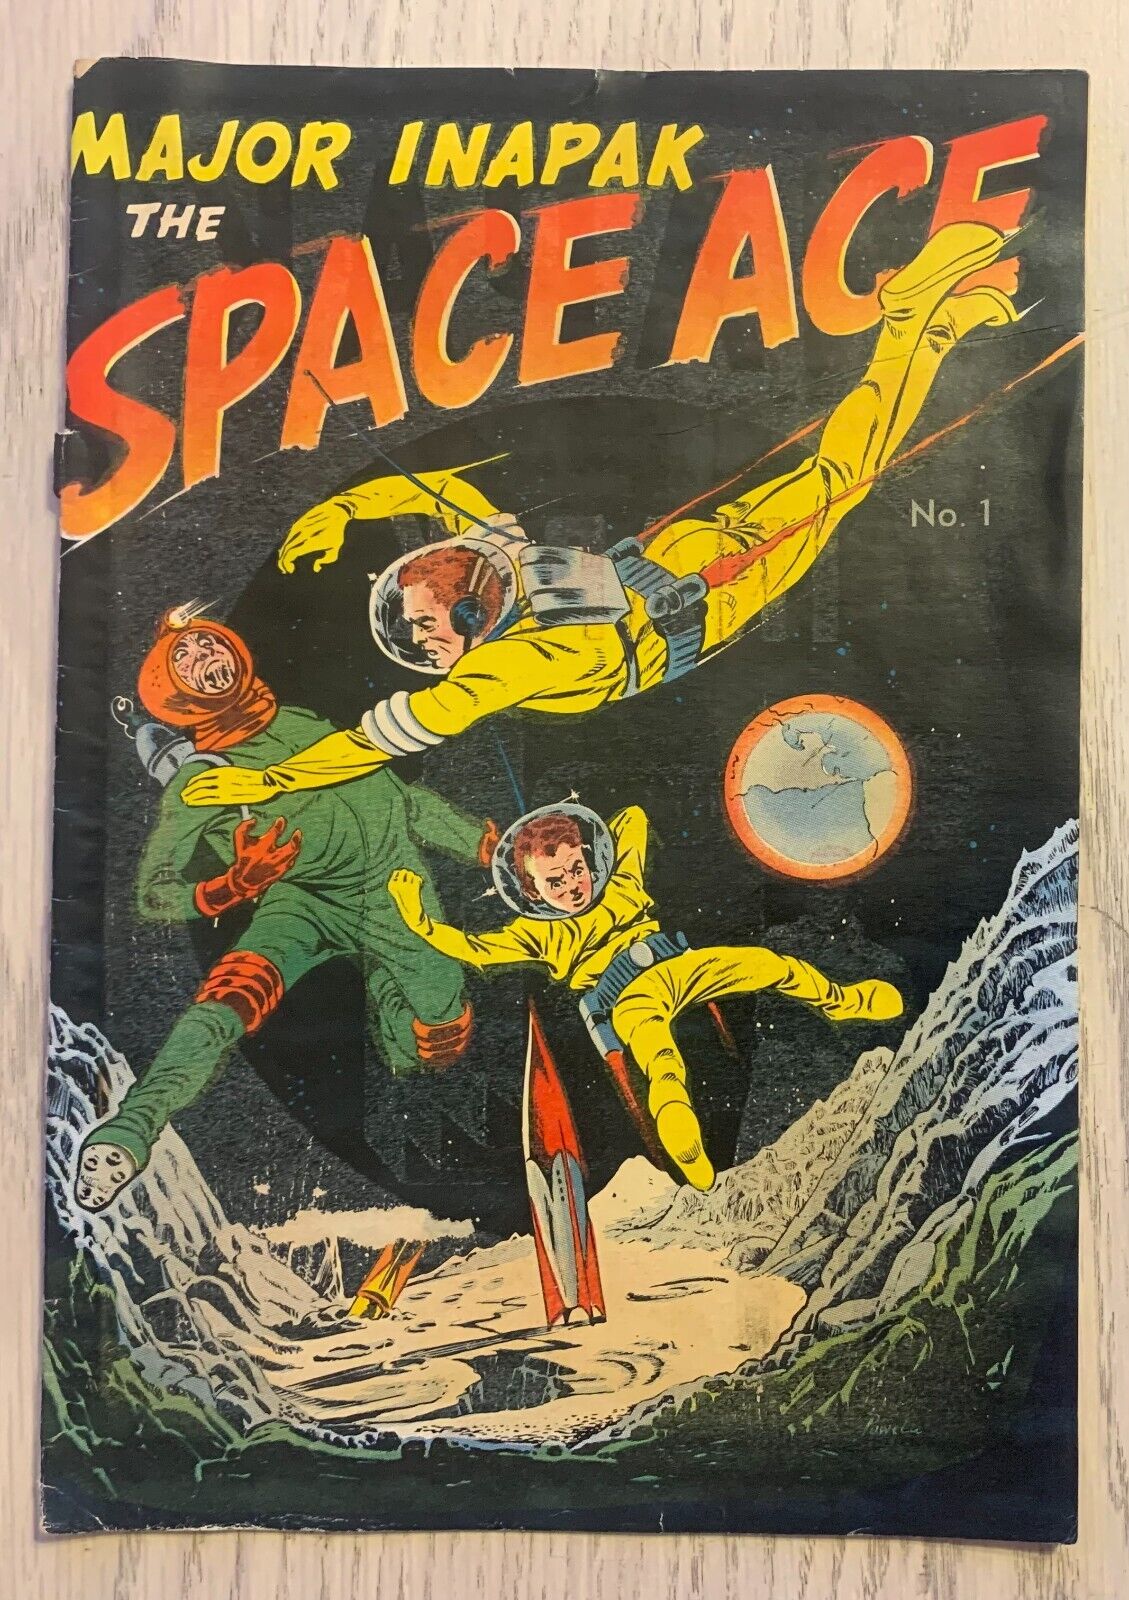 MAJOR INAPAK - The Space Ace  #1 - Golden Age Comic - Advertising - 1951